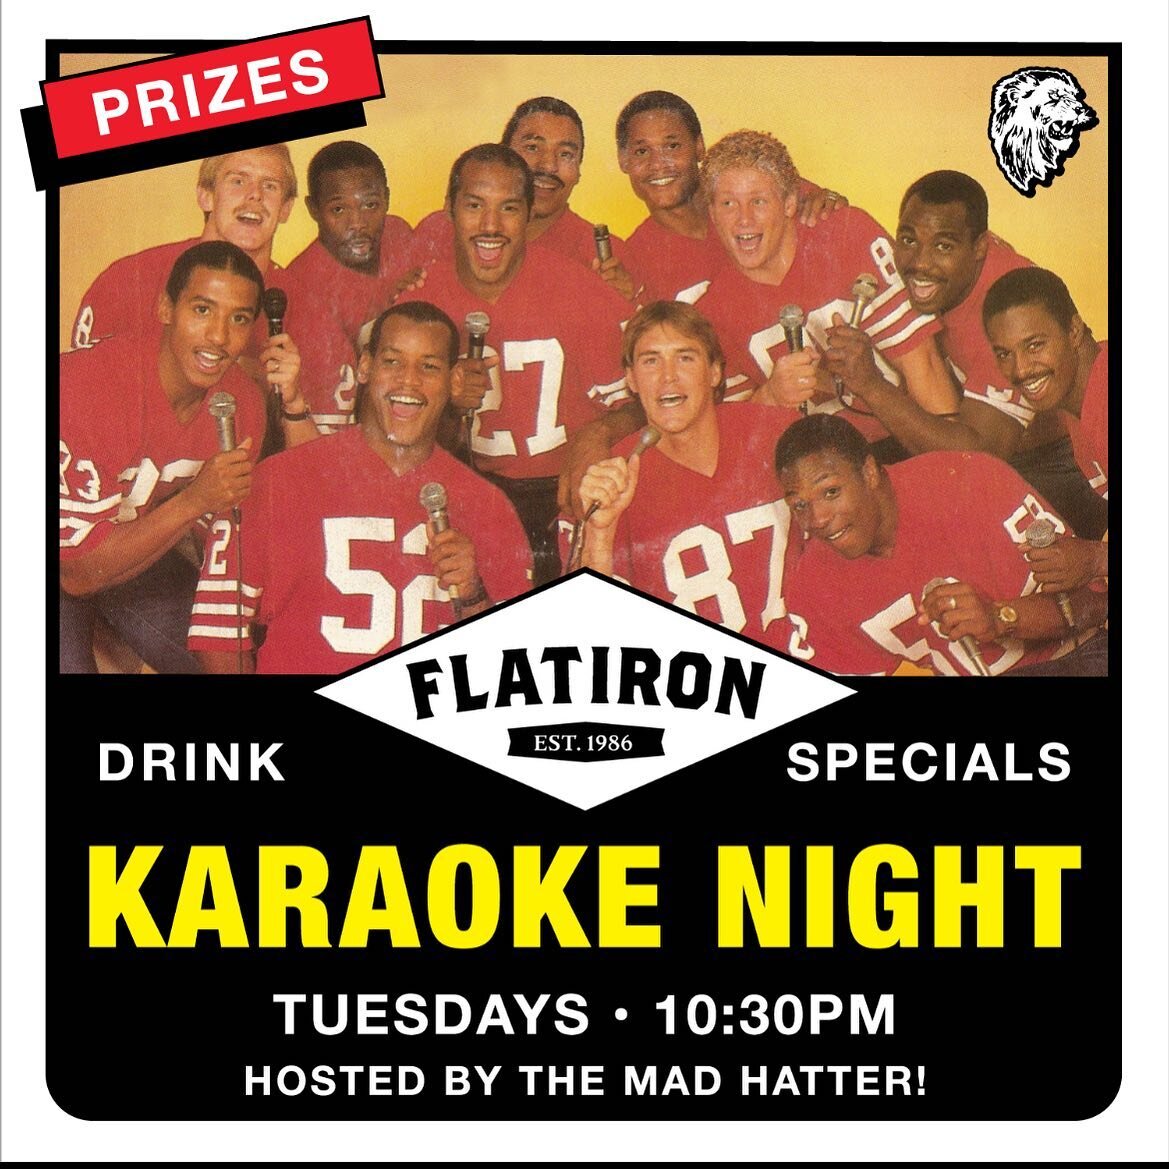 Next Tuesday! 10:30 pm Come sing your heart out! Masked and social distanced! We will be belting out our favorite tunes every Tuesday from here on in! Hosted by the one and only MAD HATTER!  #karaoke #flatironsr #weareback